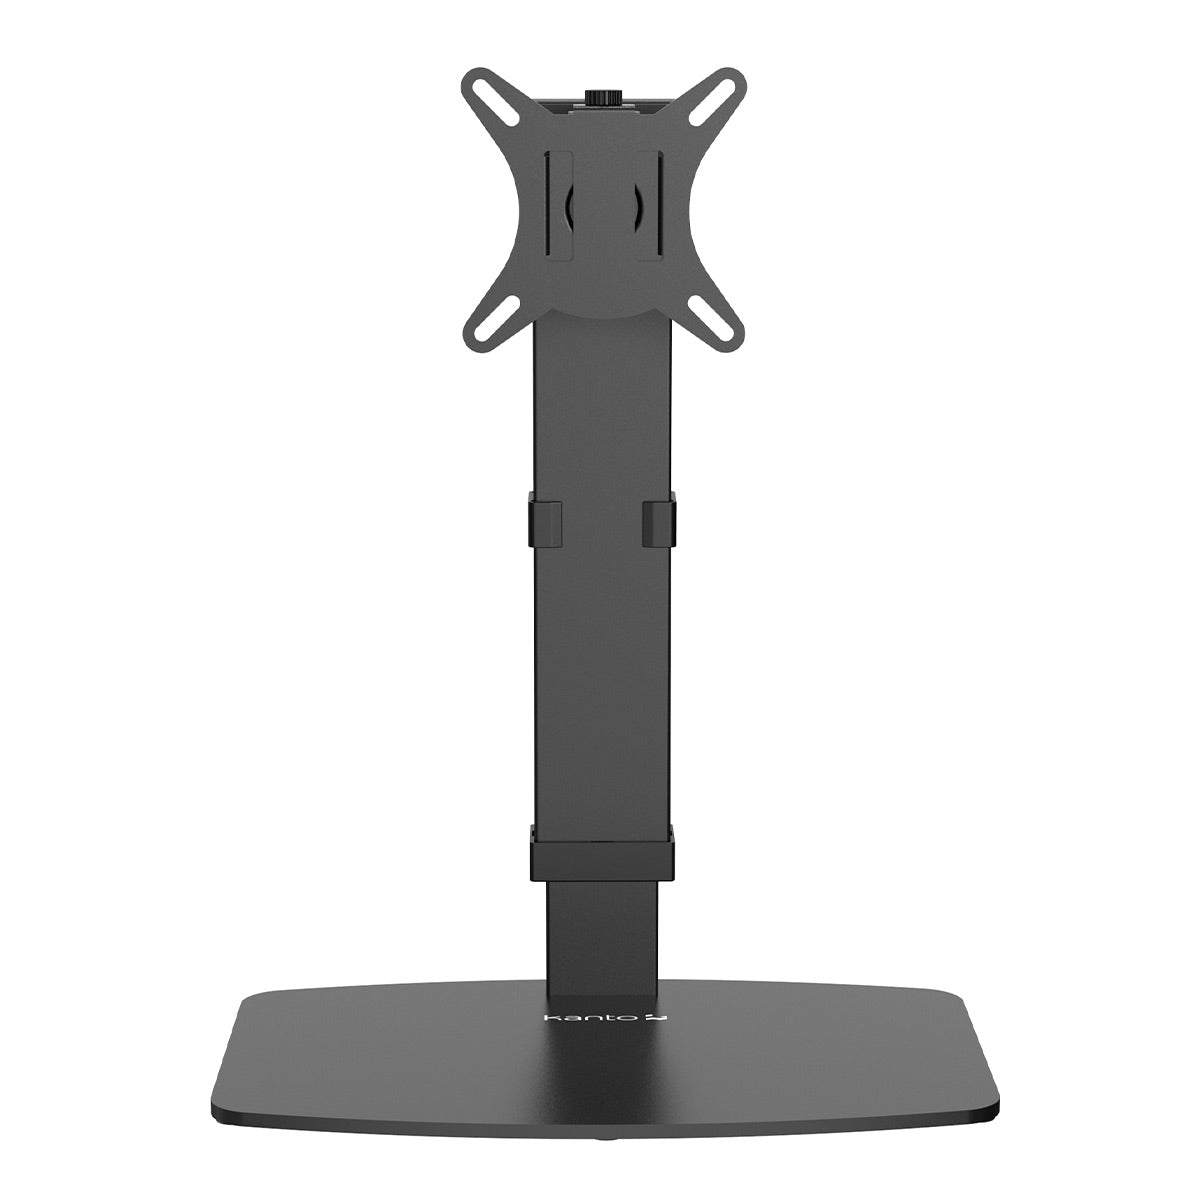 Kanto DTS1000 Universal Desktop Stand with Adjustable Height, Tilt, and Swivel for 17" - 32" Monitors